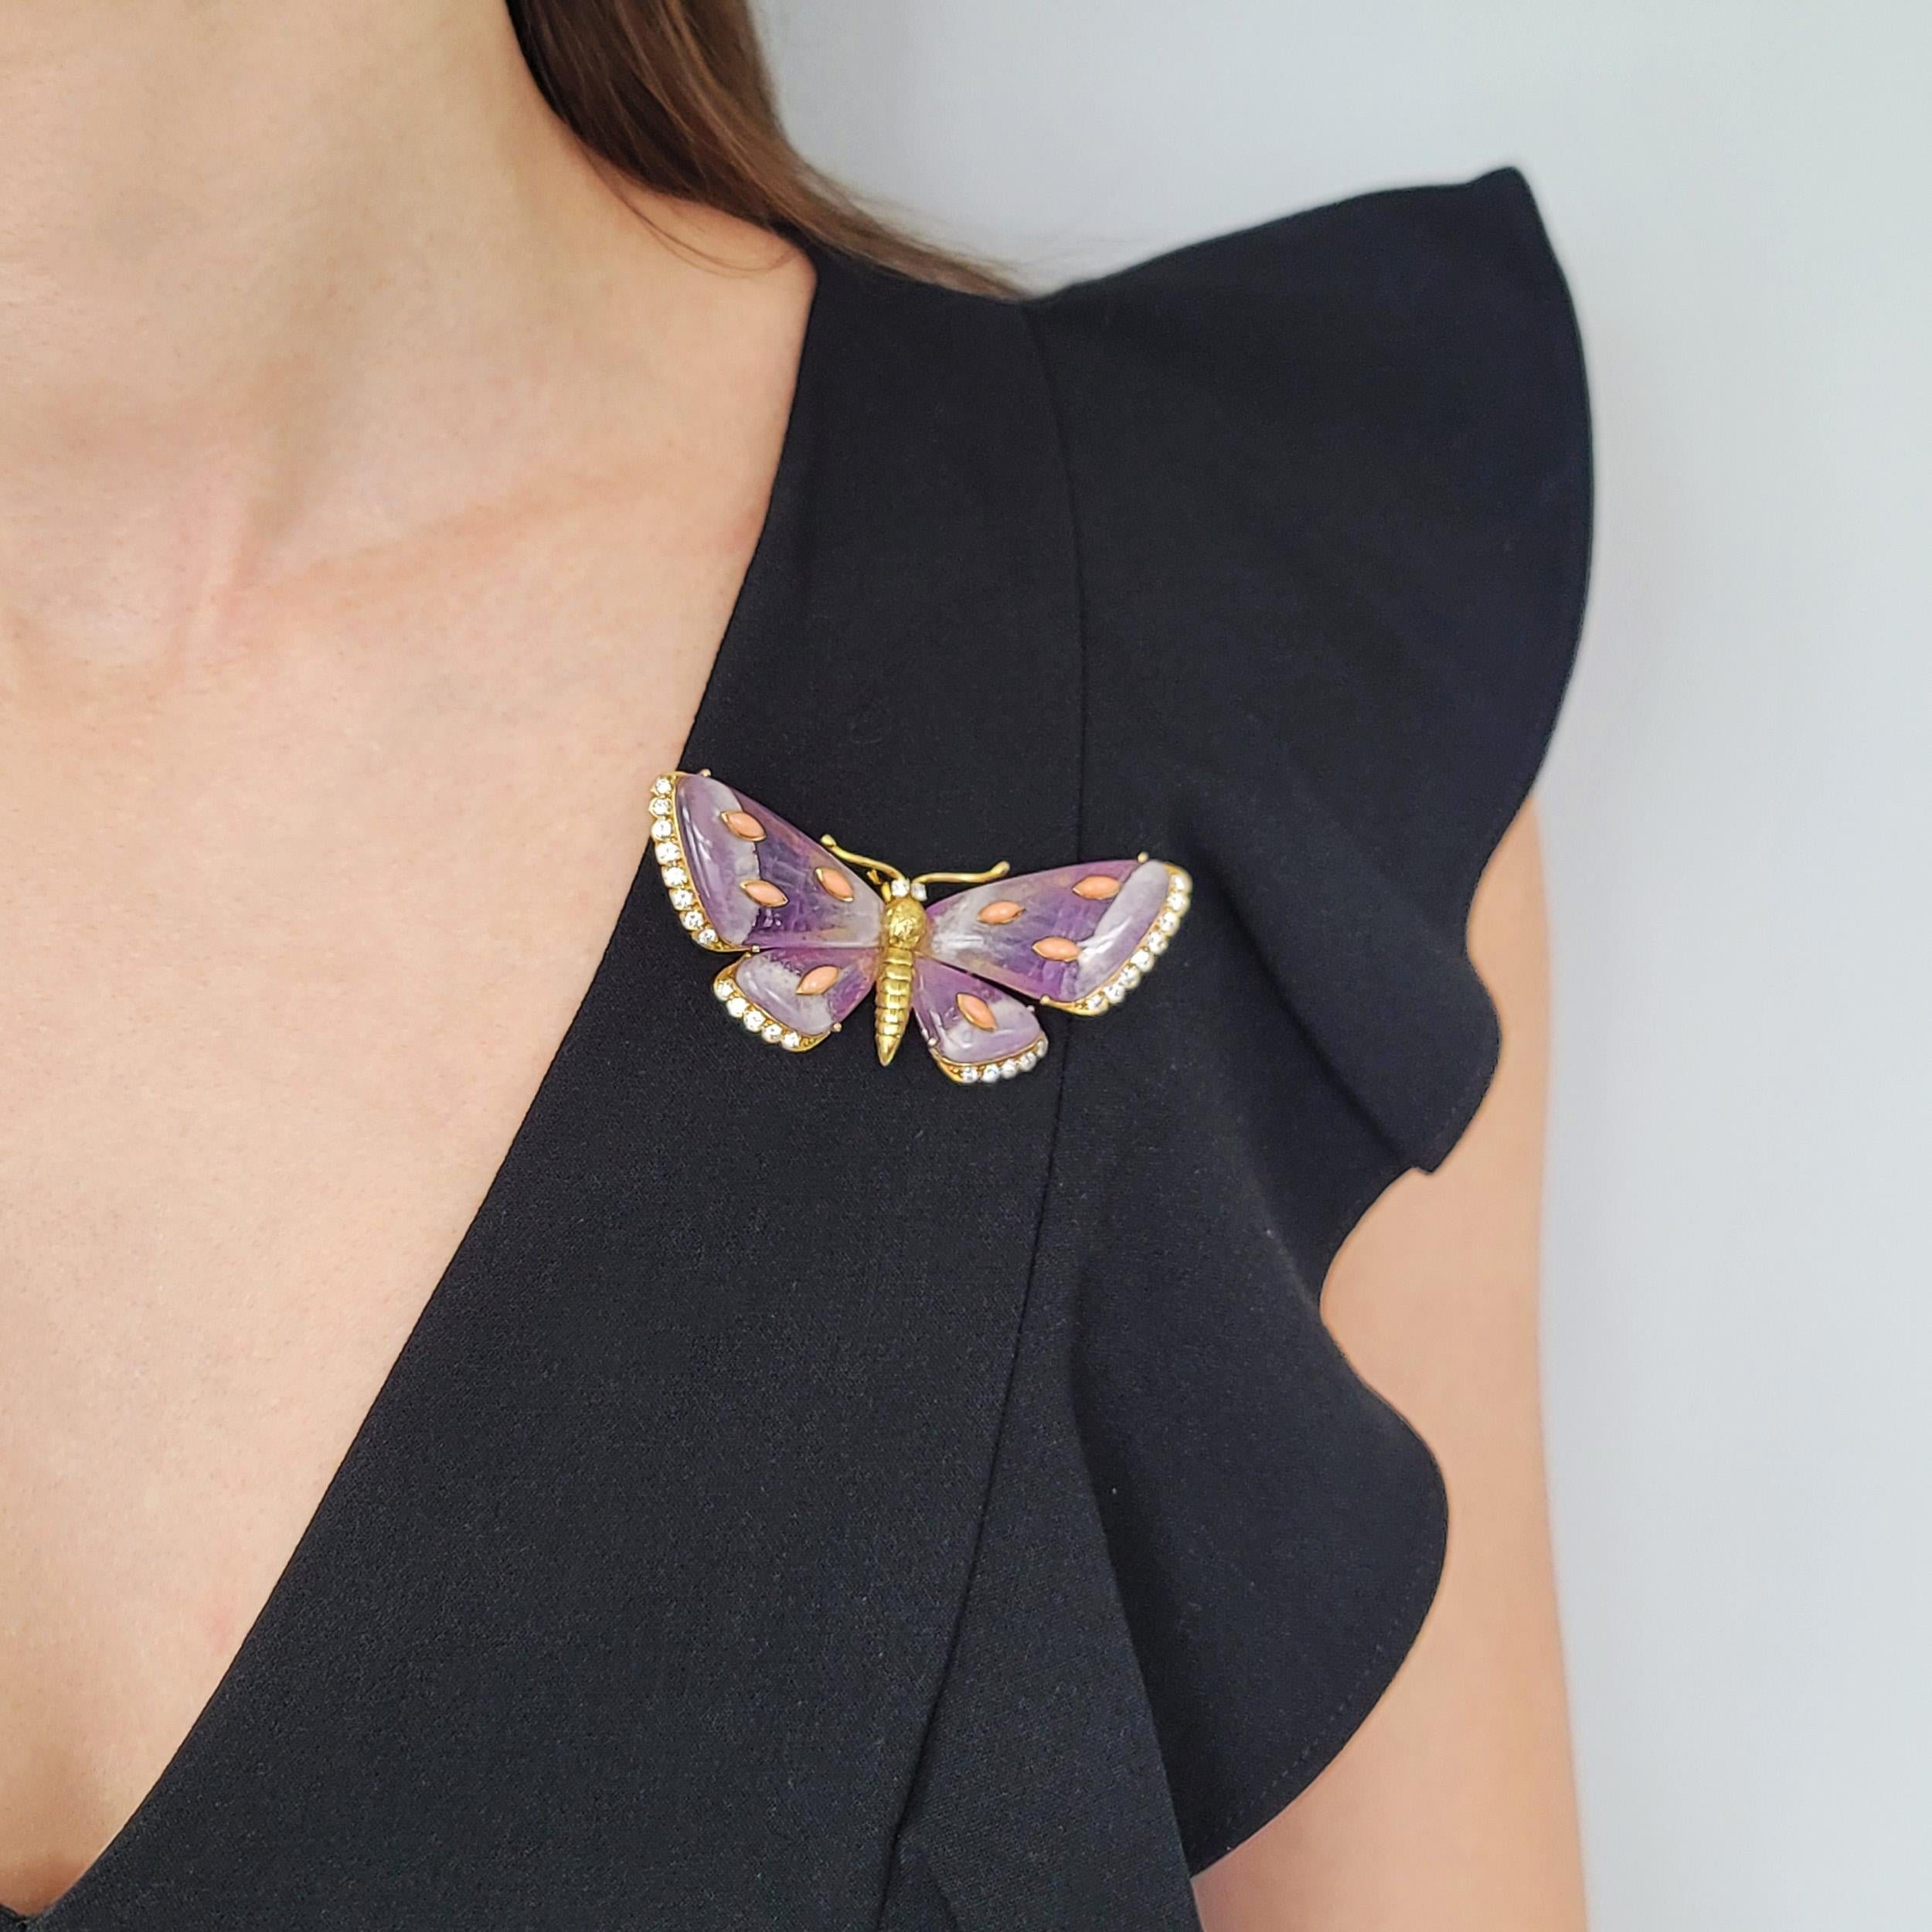 Amethyst, diamond and coral butterfly brooch in 18k yellow gold. Circa 1970's. Made in France. The butterfly features gold body, cabochon cut amethyst wings with 8 cabochon cut pink
coral spots. Edges of the wings and eyes set with round brilliant